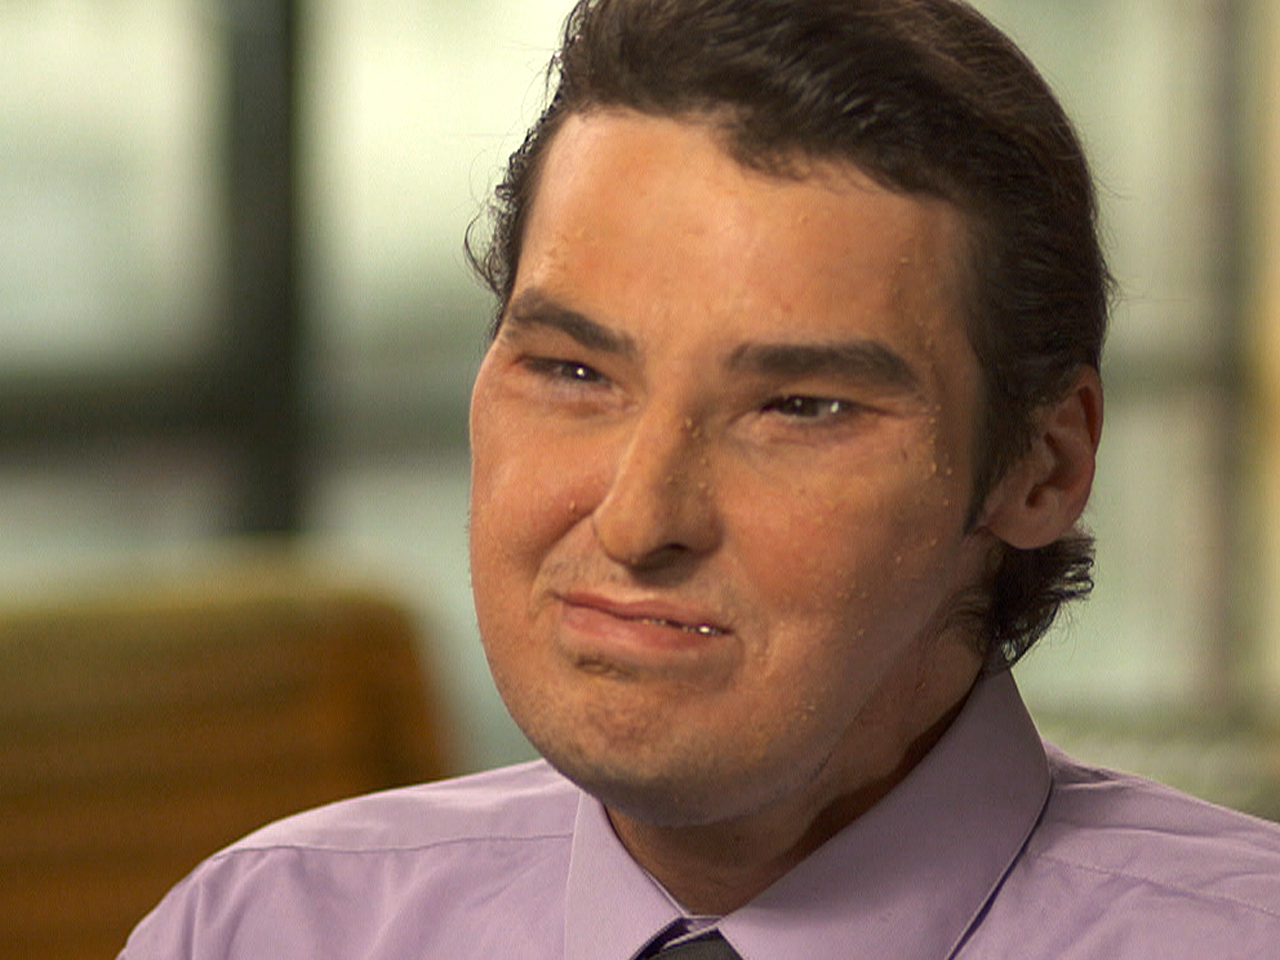 A face in the crowd: A year after most extensive face transplant in history